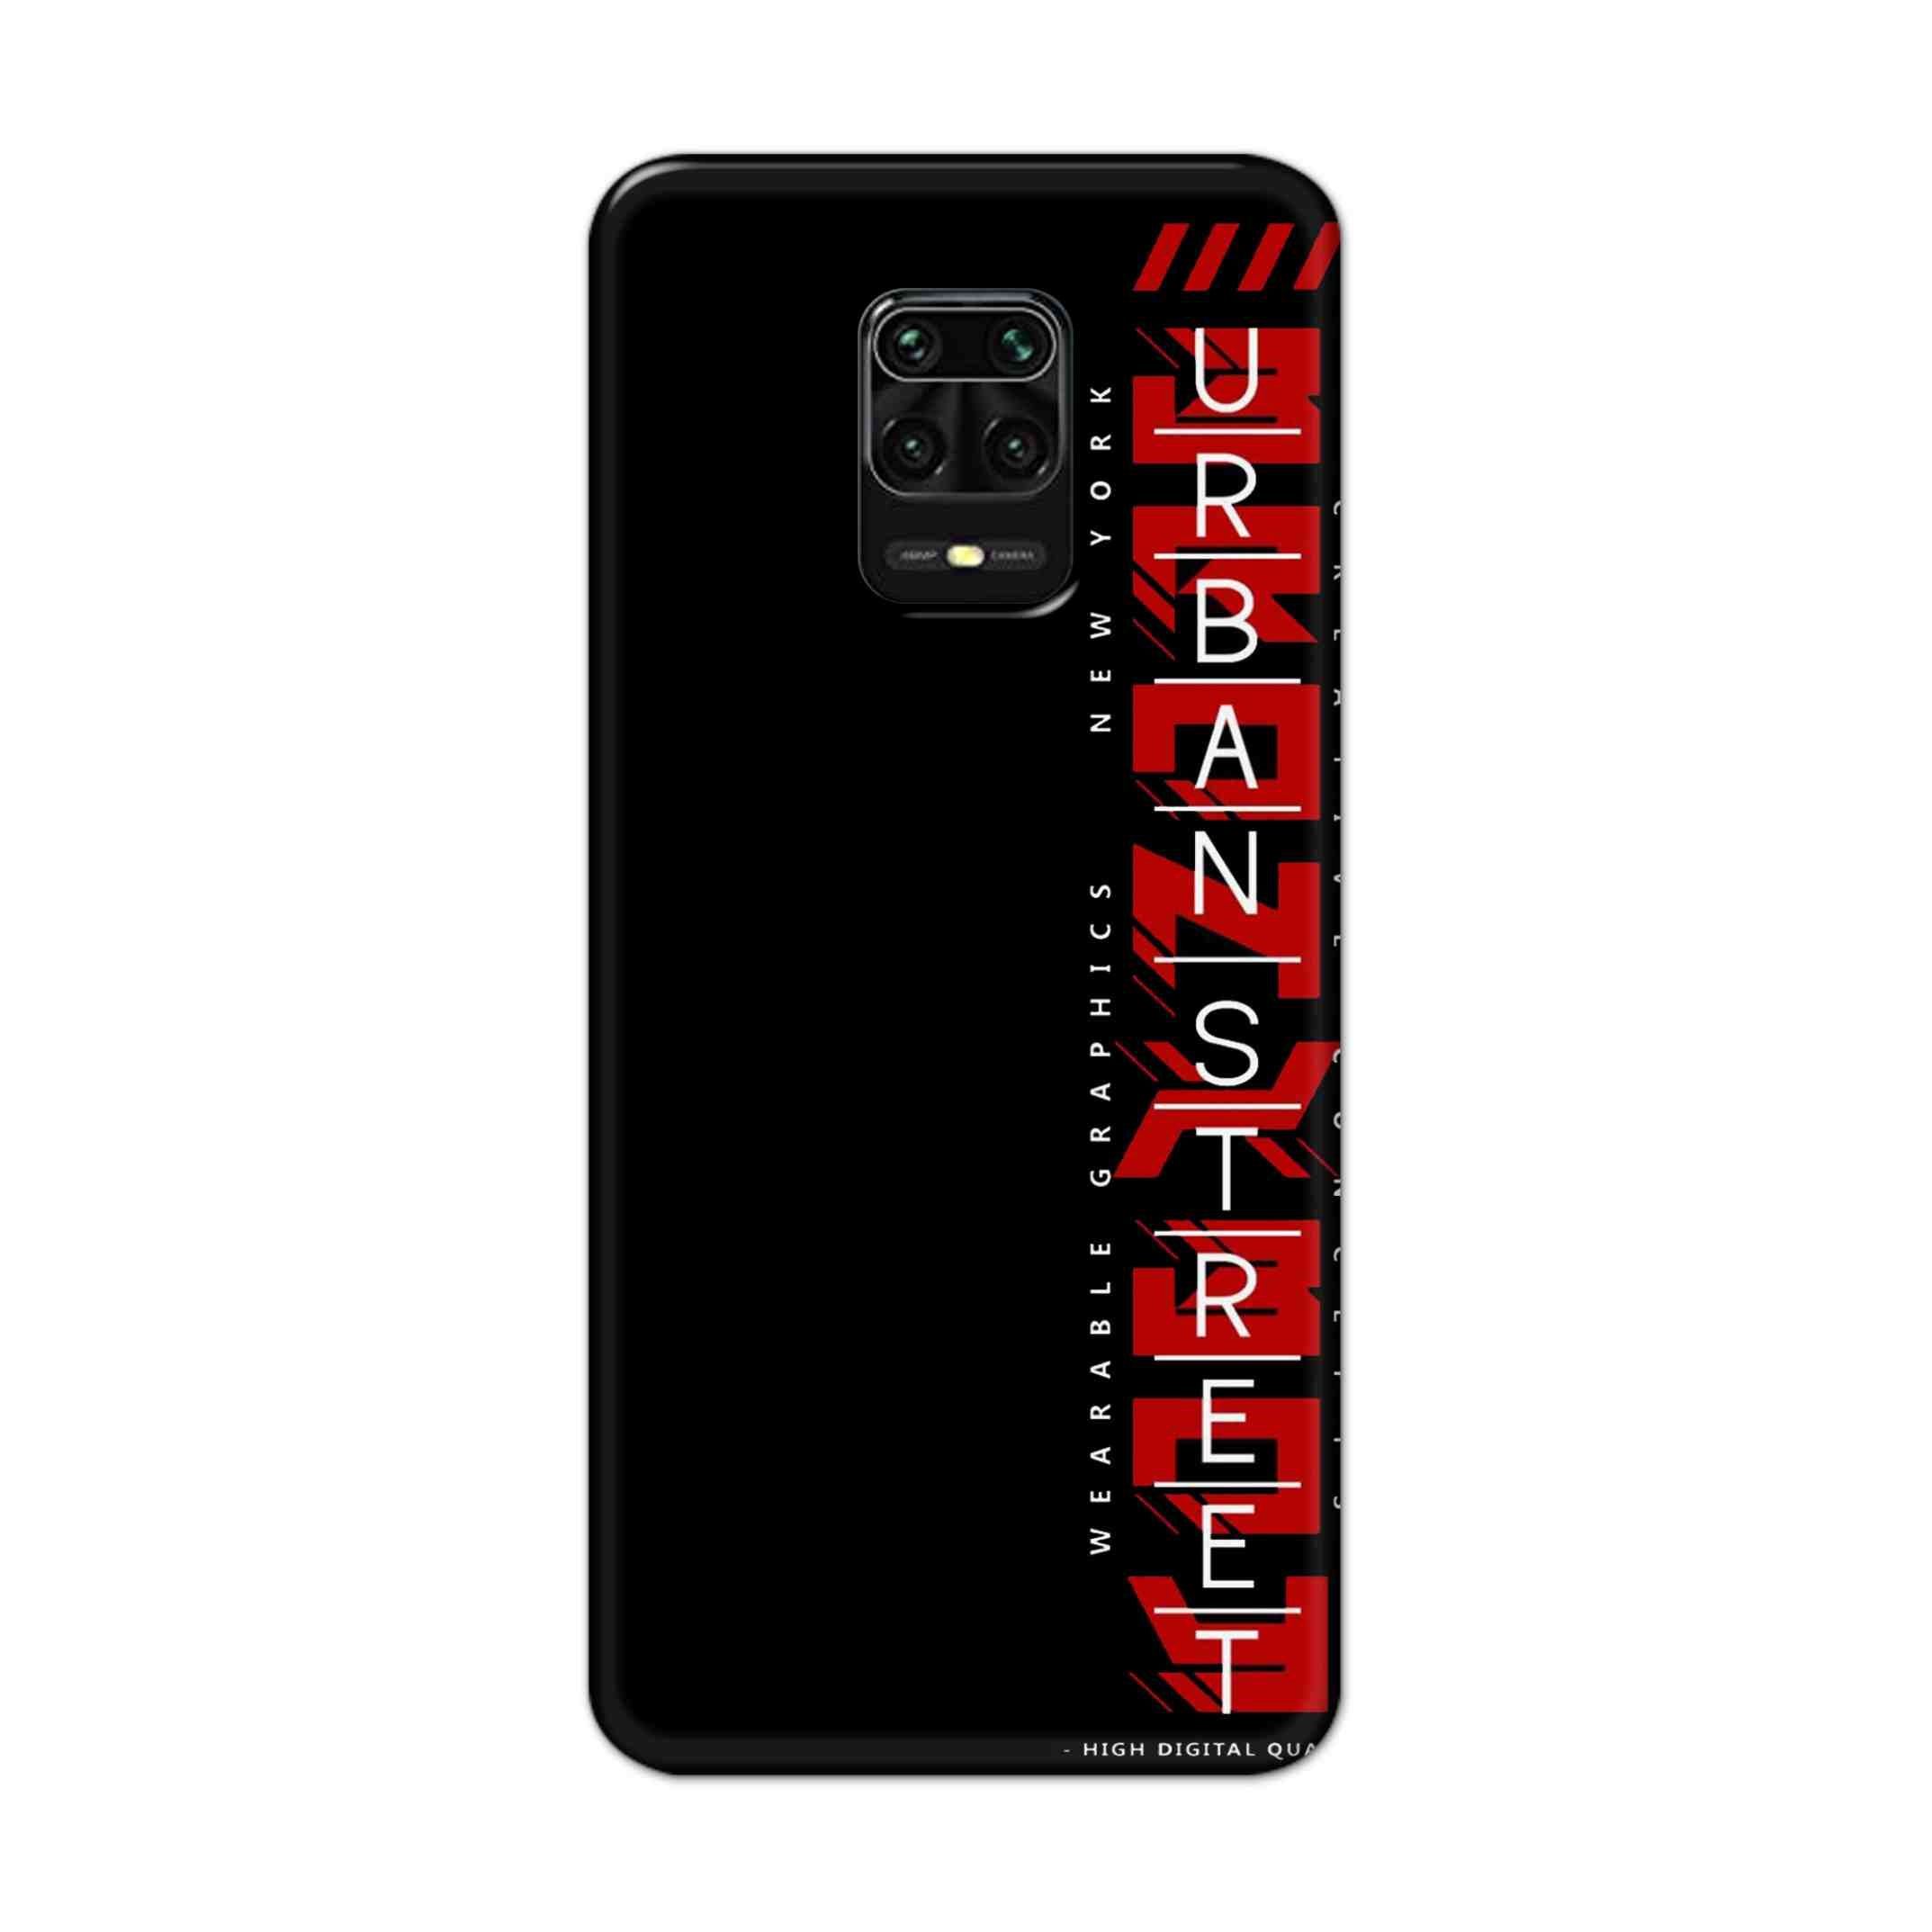 Buy Urban Street Hard Back Mobile Phone Case Cover For Redmi Note 9 Pro Online